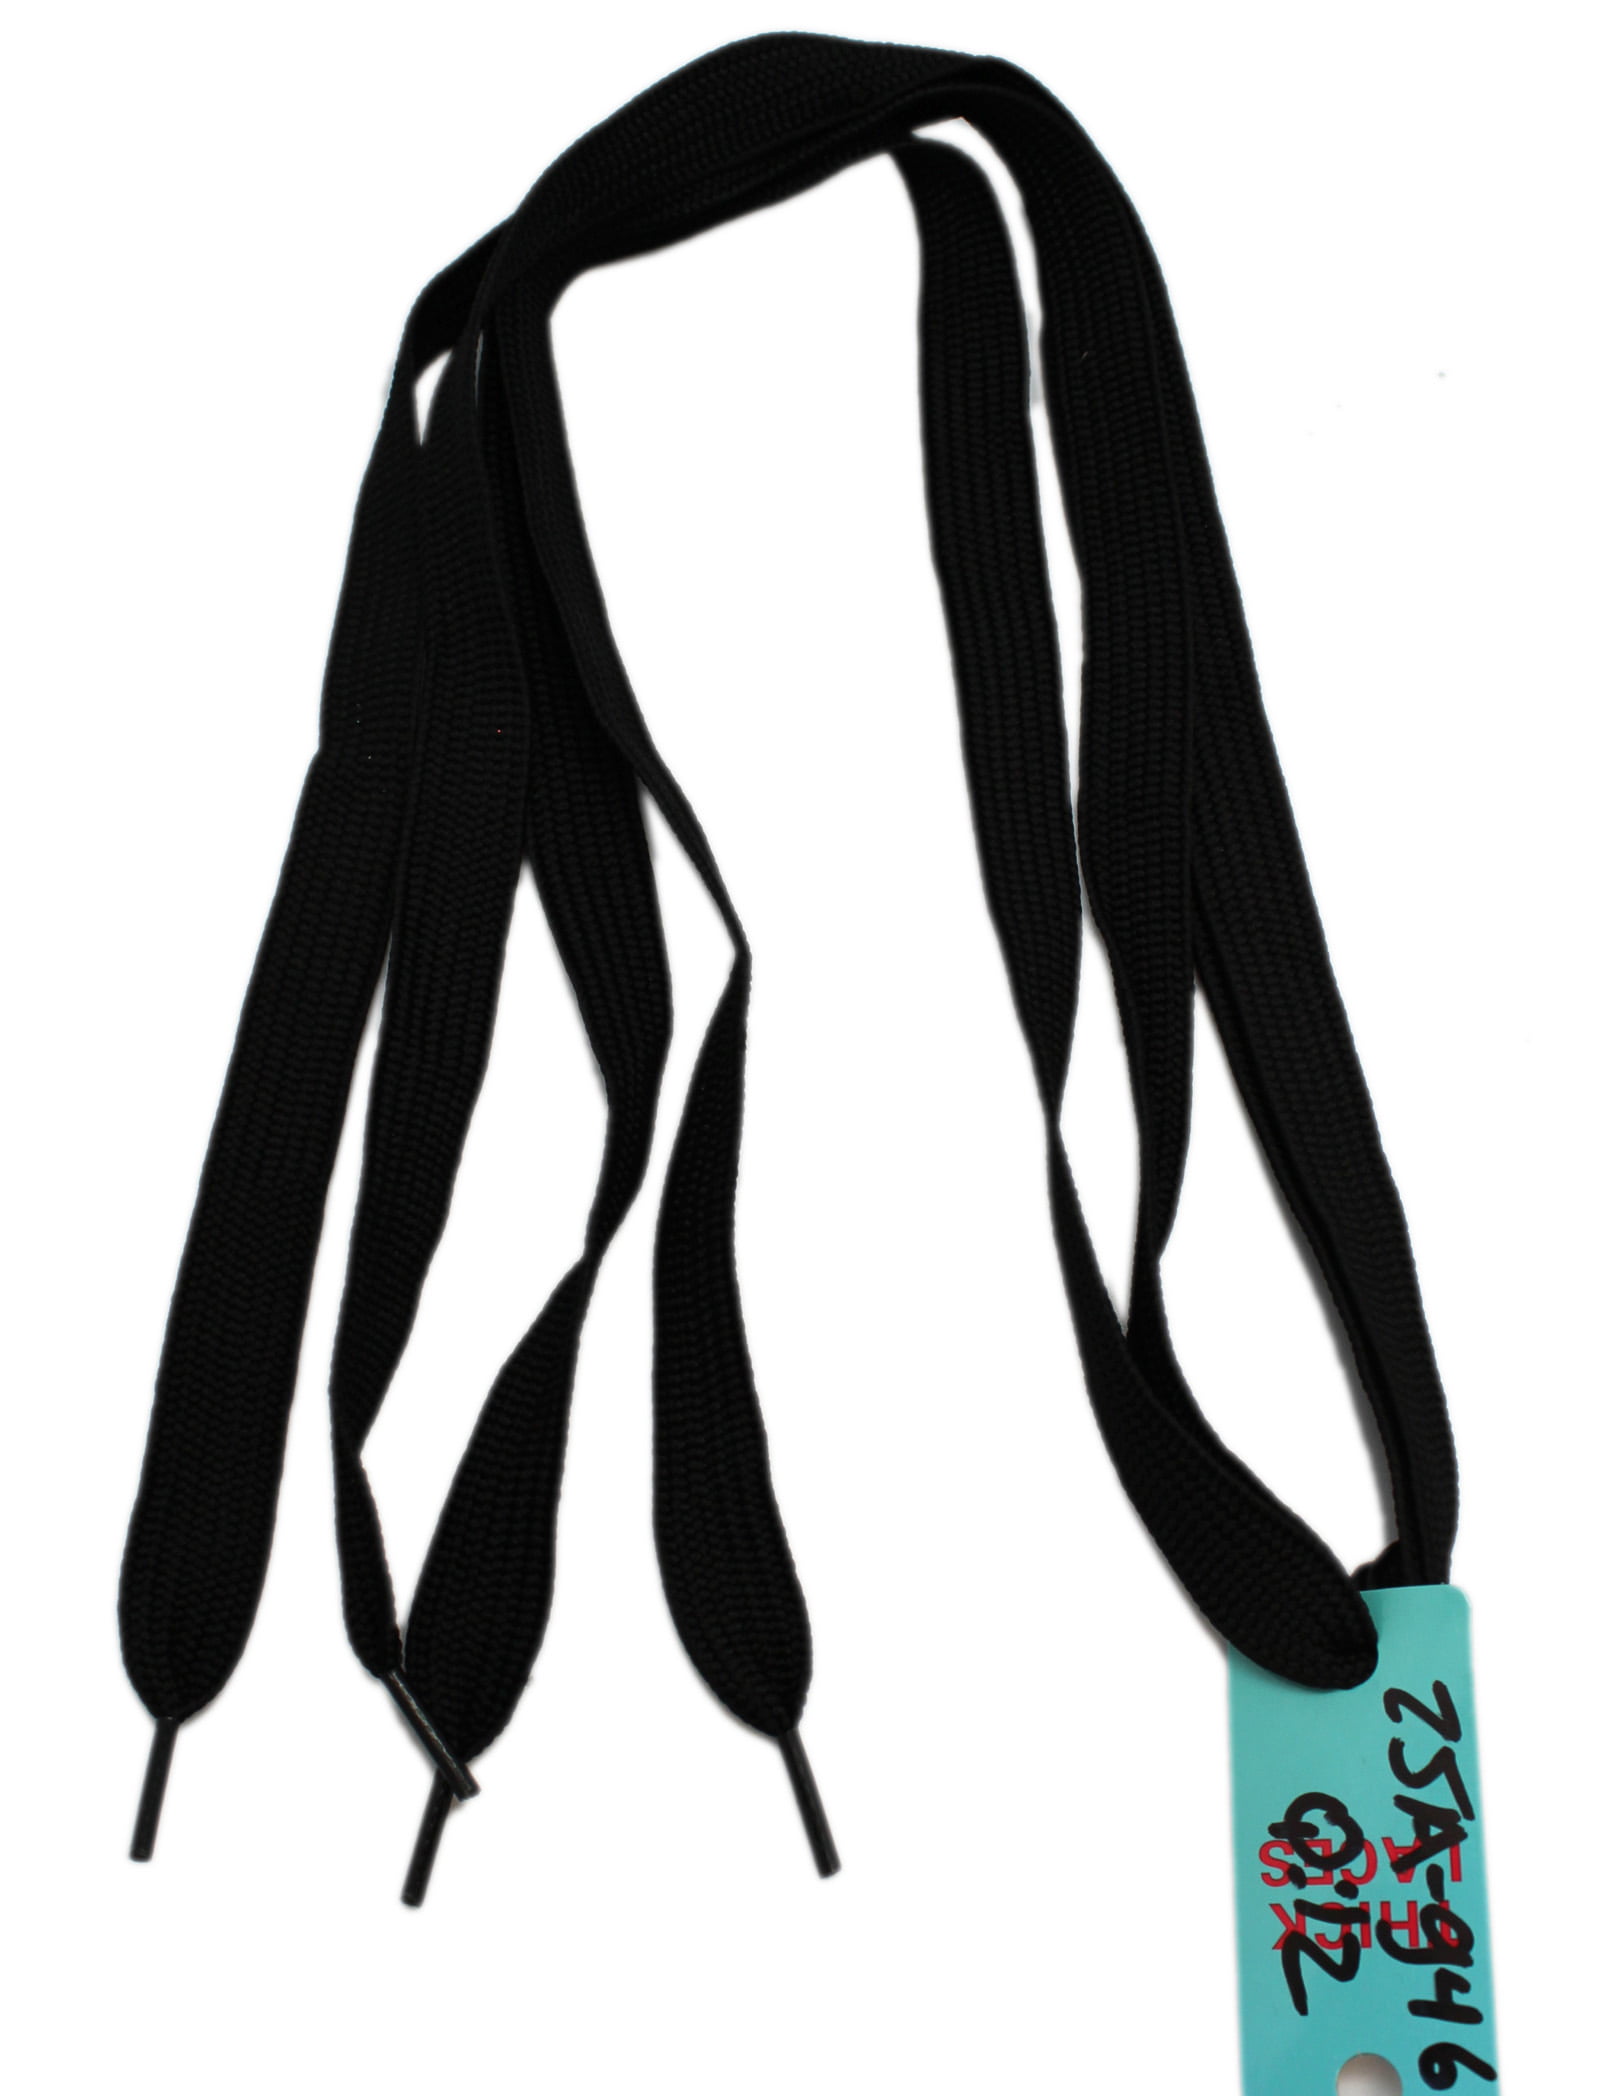 Black Extra Thick Shoelaces - 50 